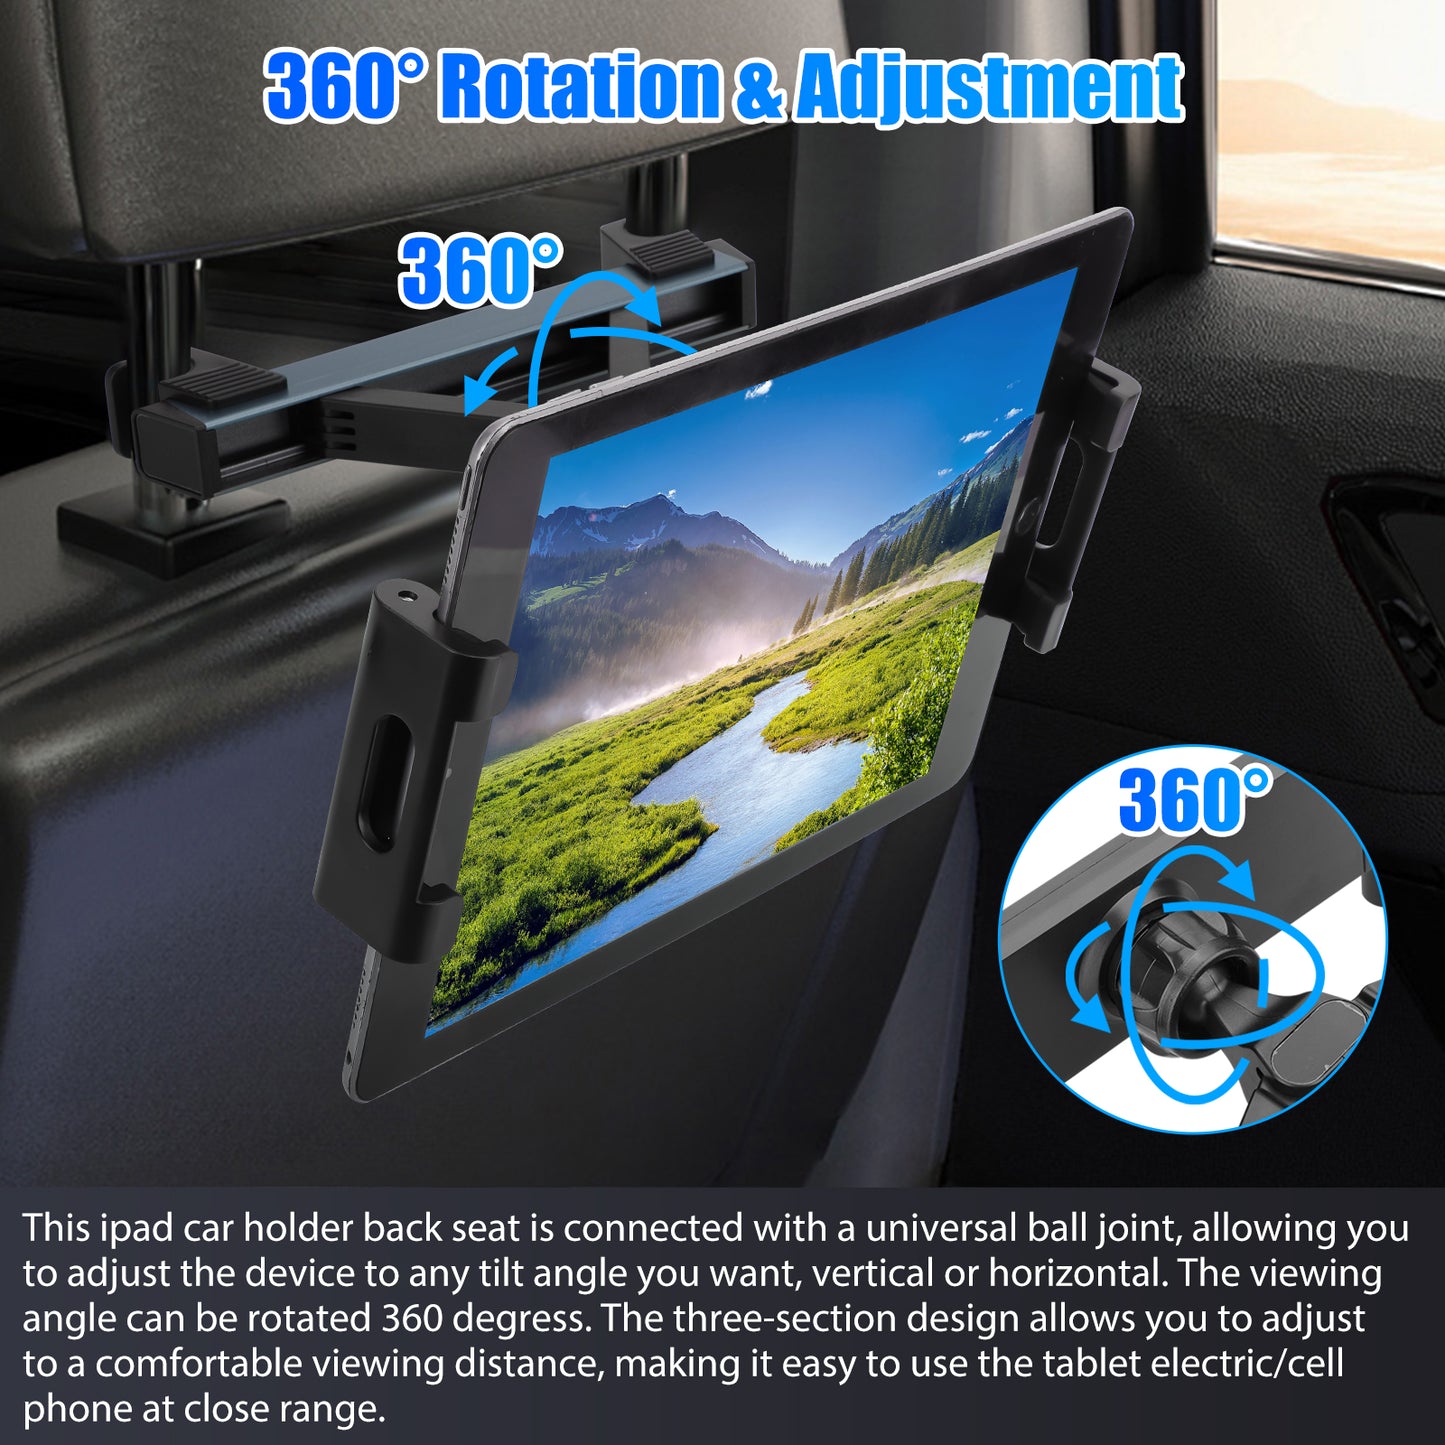 360° Universal Tablet Holder - Car Back Seat Tablet Mount Stand for Kids, Compatible with iPad Pro/Air/Mini, Nintendo Switch, iPhone Samsung, 4.7 to 12.9" Devices